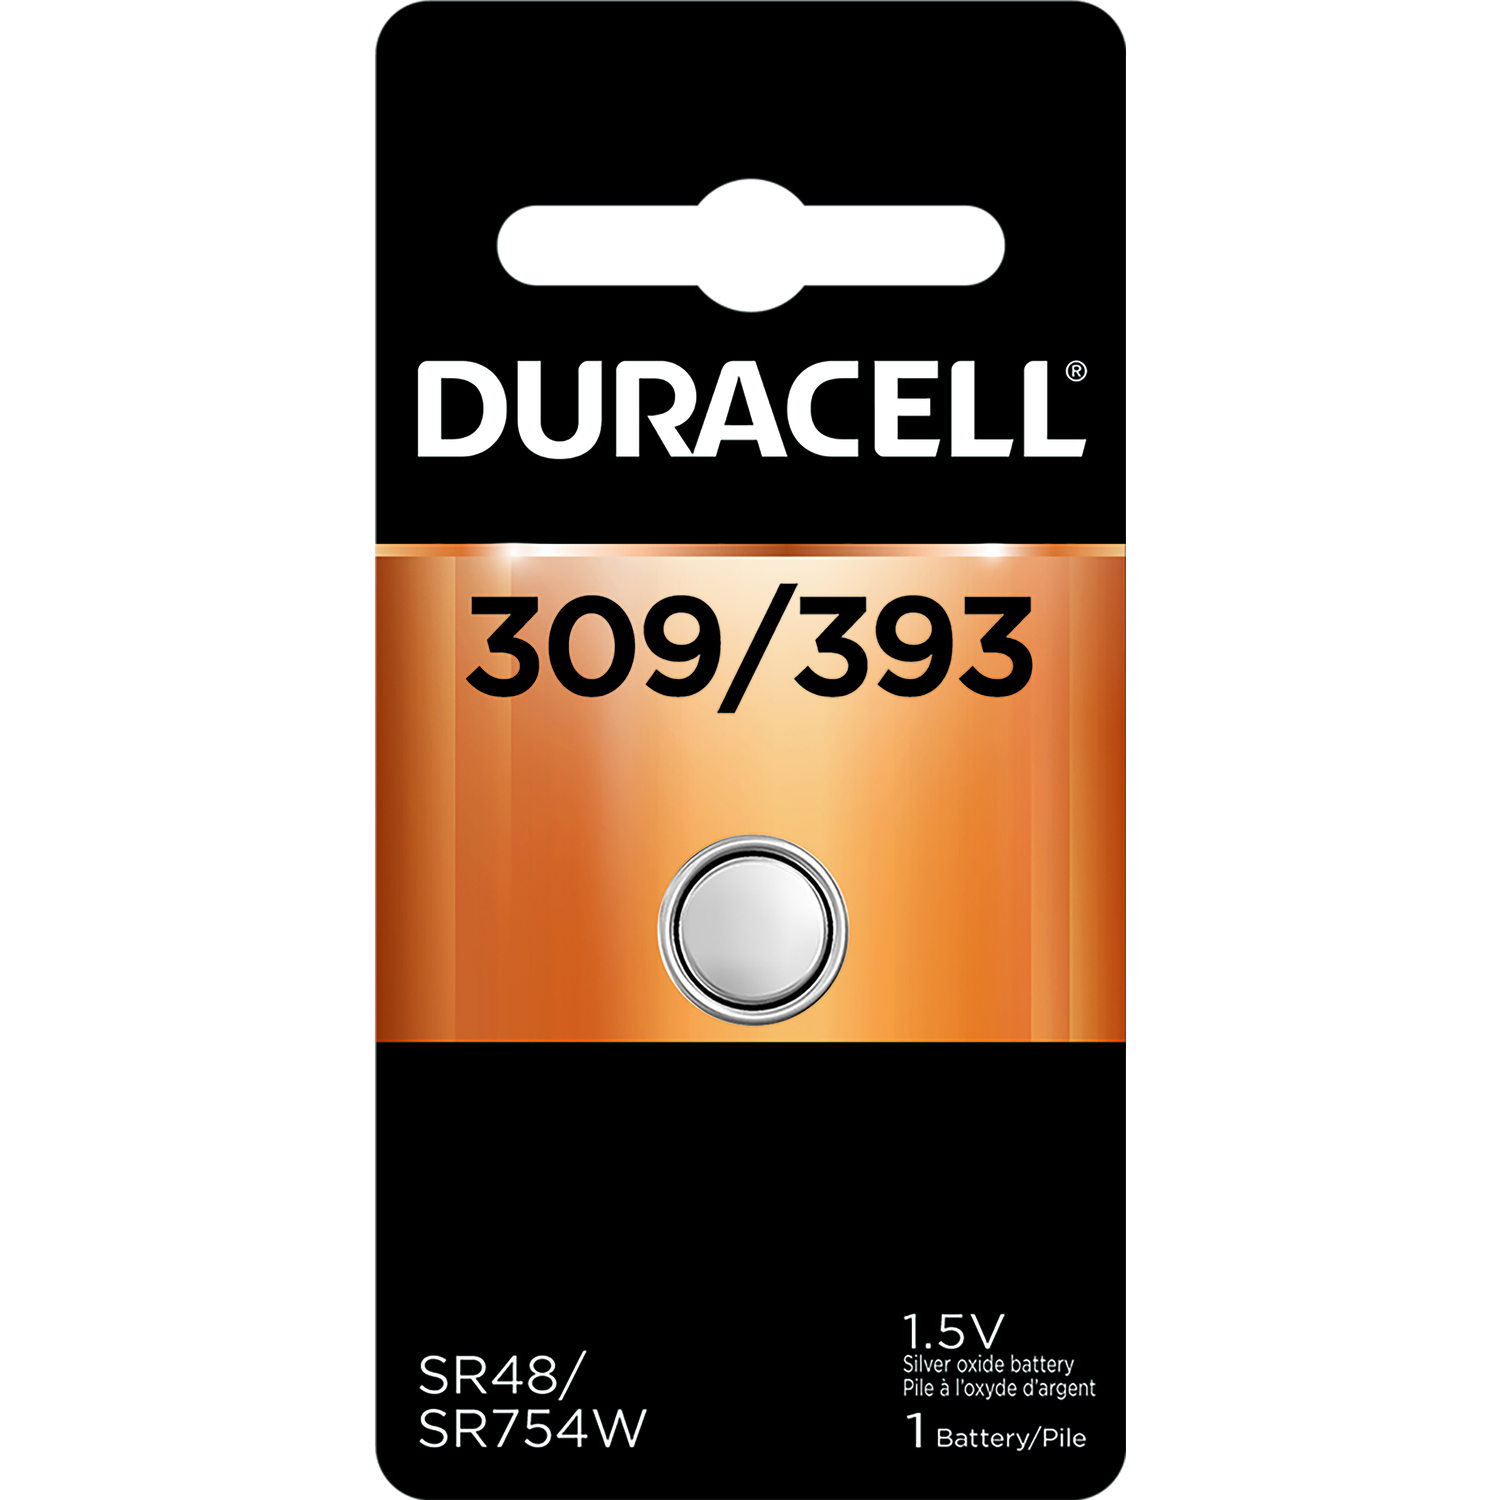 Duracell Silver Oxide 309/393 1.5 V 80 Ah Electronic/Watch Battery 1 pk